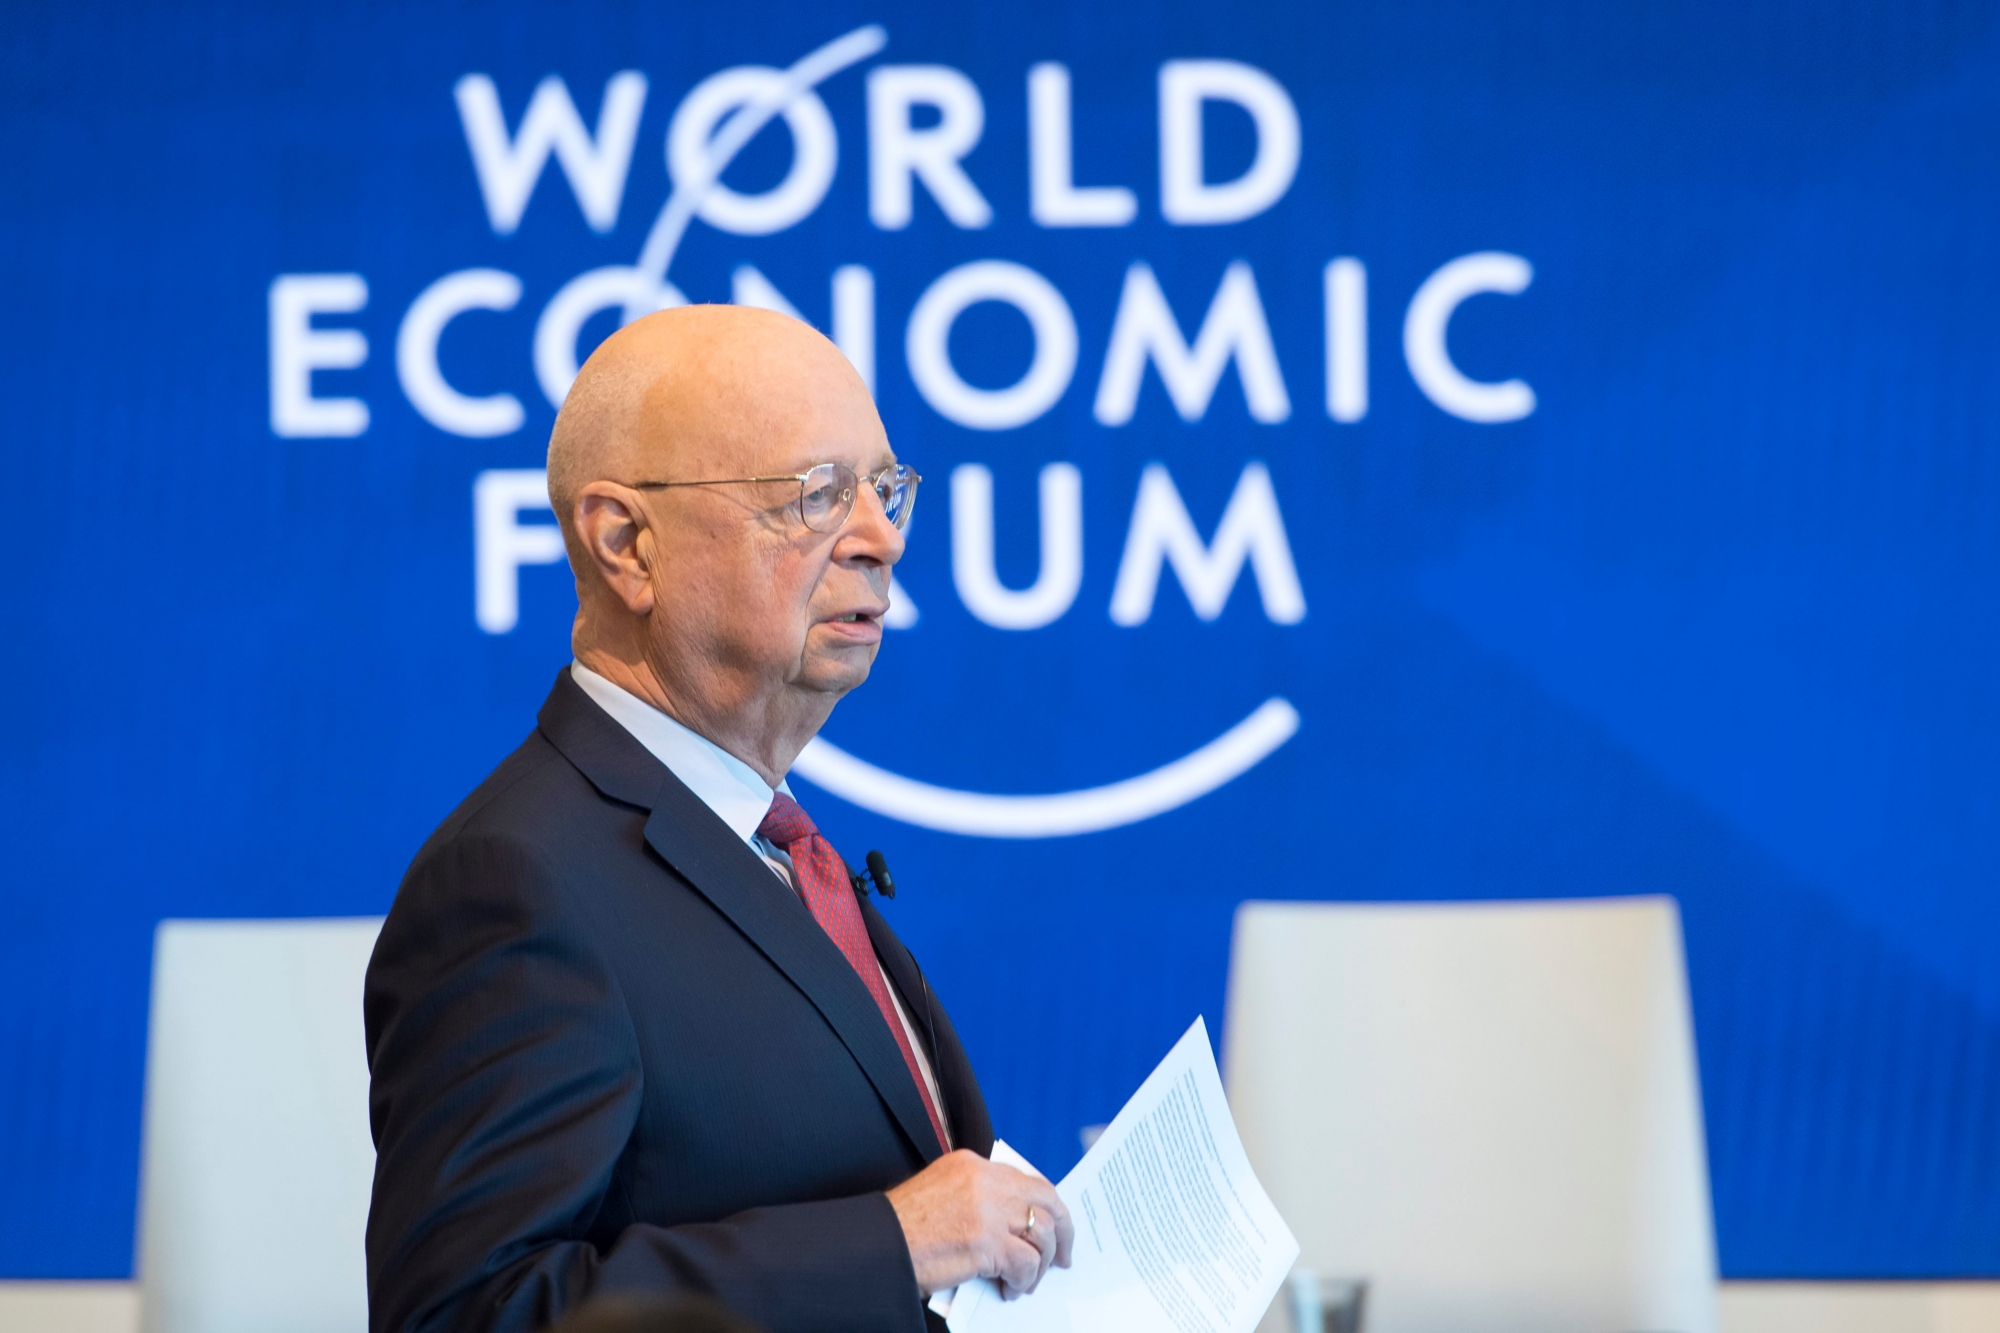 German Klaus Schwab, Founder and Executive Chairman of the World Economic Forum, WEF, arrives for a press conference, in Cologny near Geneva, Tuesday, January 15, 2019. The World Economic Forum today unveiled the programme for its Annual Meeting in Davos, Switzerland, including the key participants, themes and goals. The overarching theme of the Meeting, which will take place from 22 to 25 January, is "Globalization 4.0". (KEYSTONE/Laurent Gillieron) SWITZERLAND WEF 2019 DAVOS